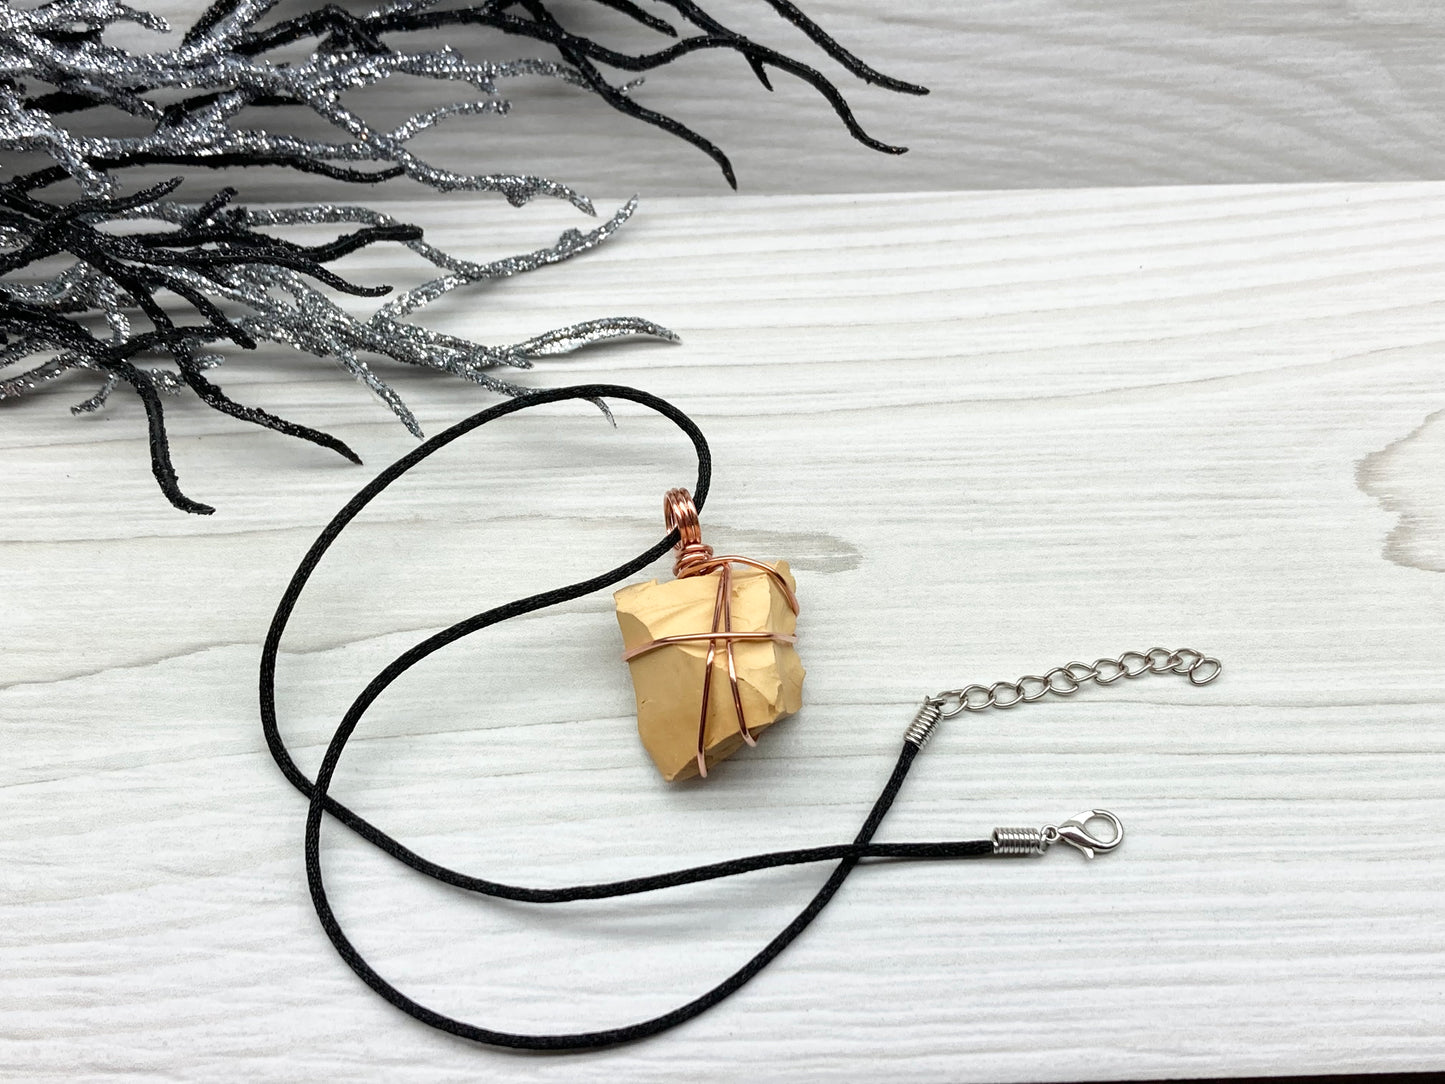 Natural Mookaite Jasper Necklace. Cream Colored Raw Mookaite Crystal Wrapped With Pure Copper Wire.  Comes On A Black Chain. Handmade Spiritual Gemstone Jewelry. Made In The USA.